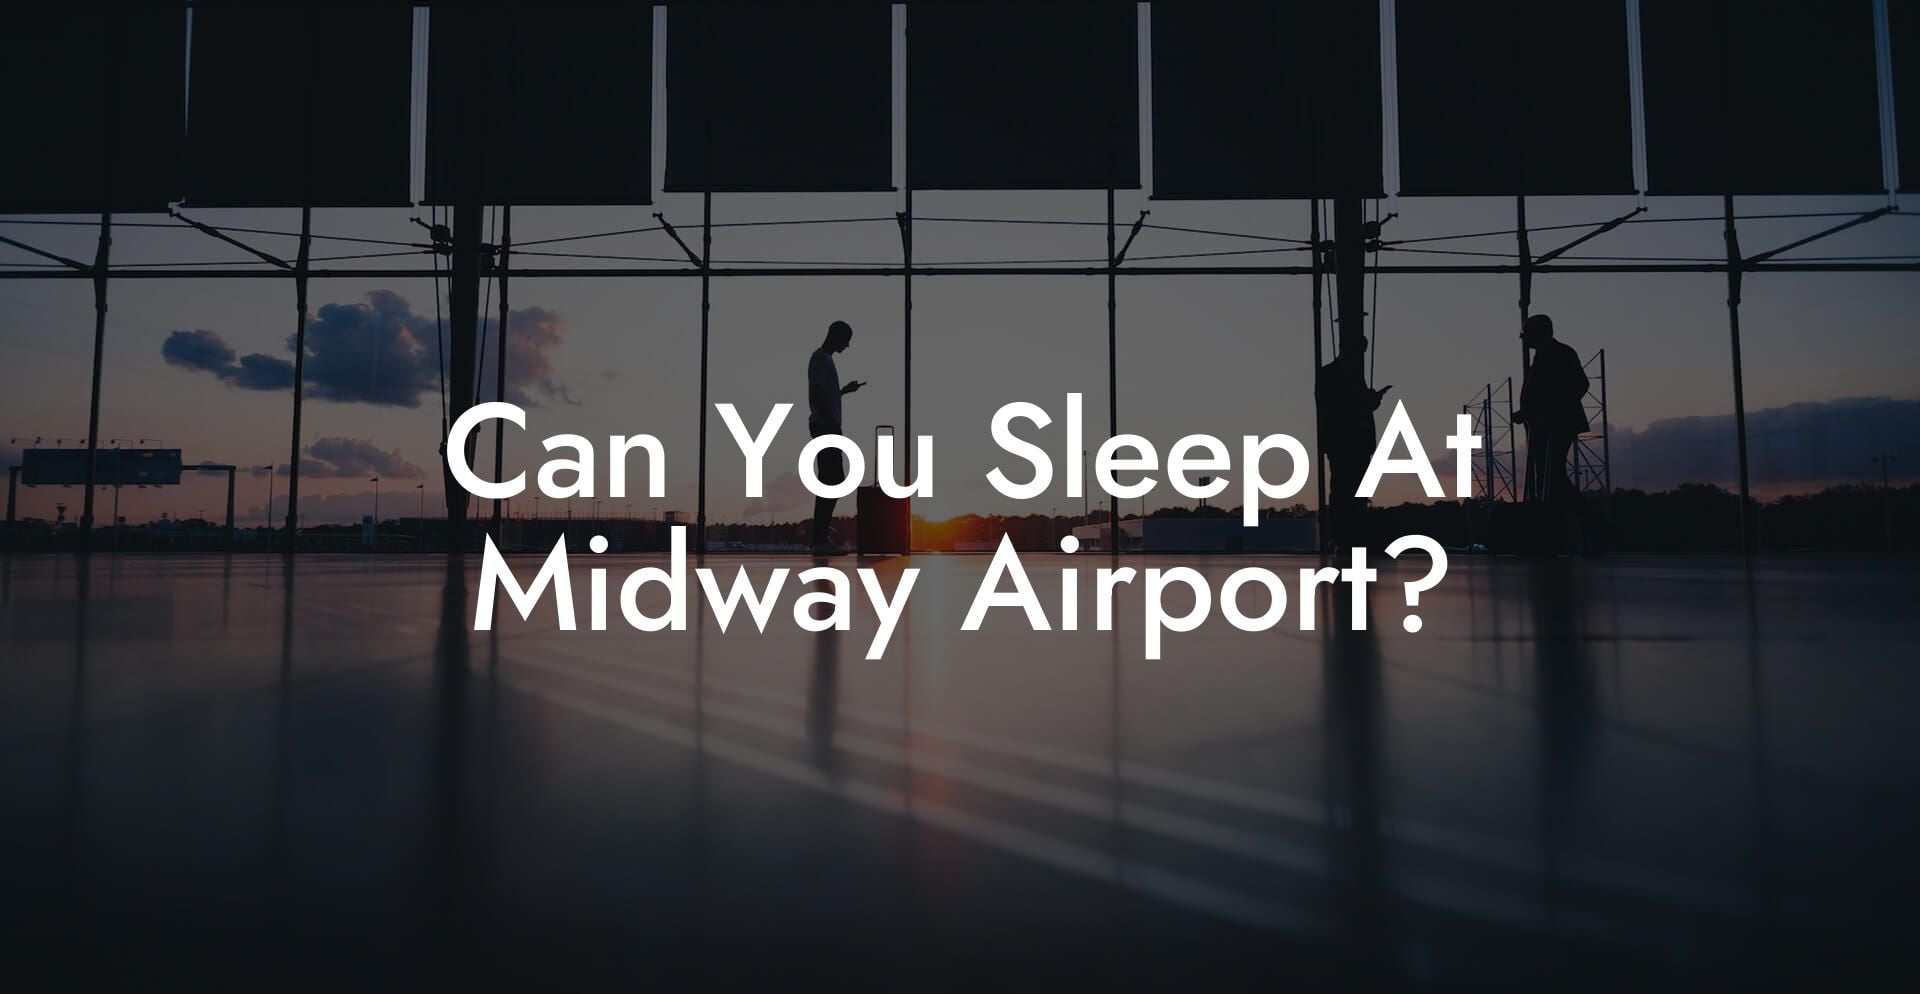 Can You Sleep At Midway Airport?